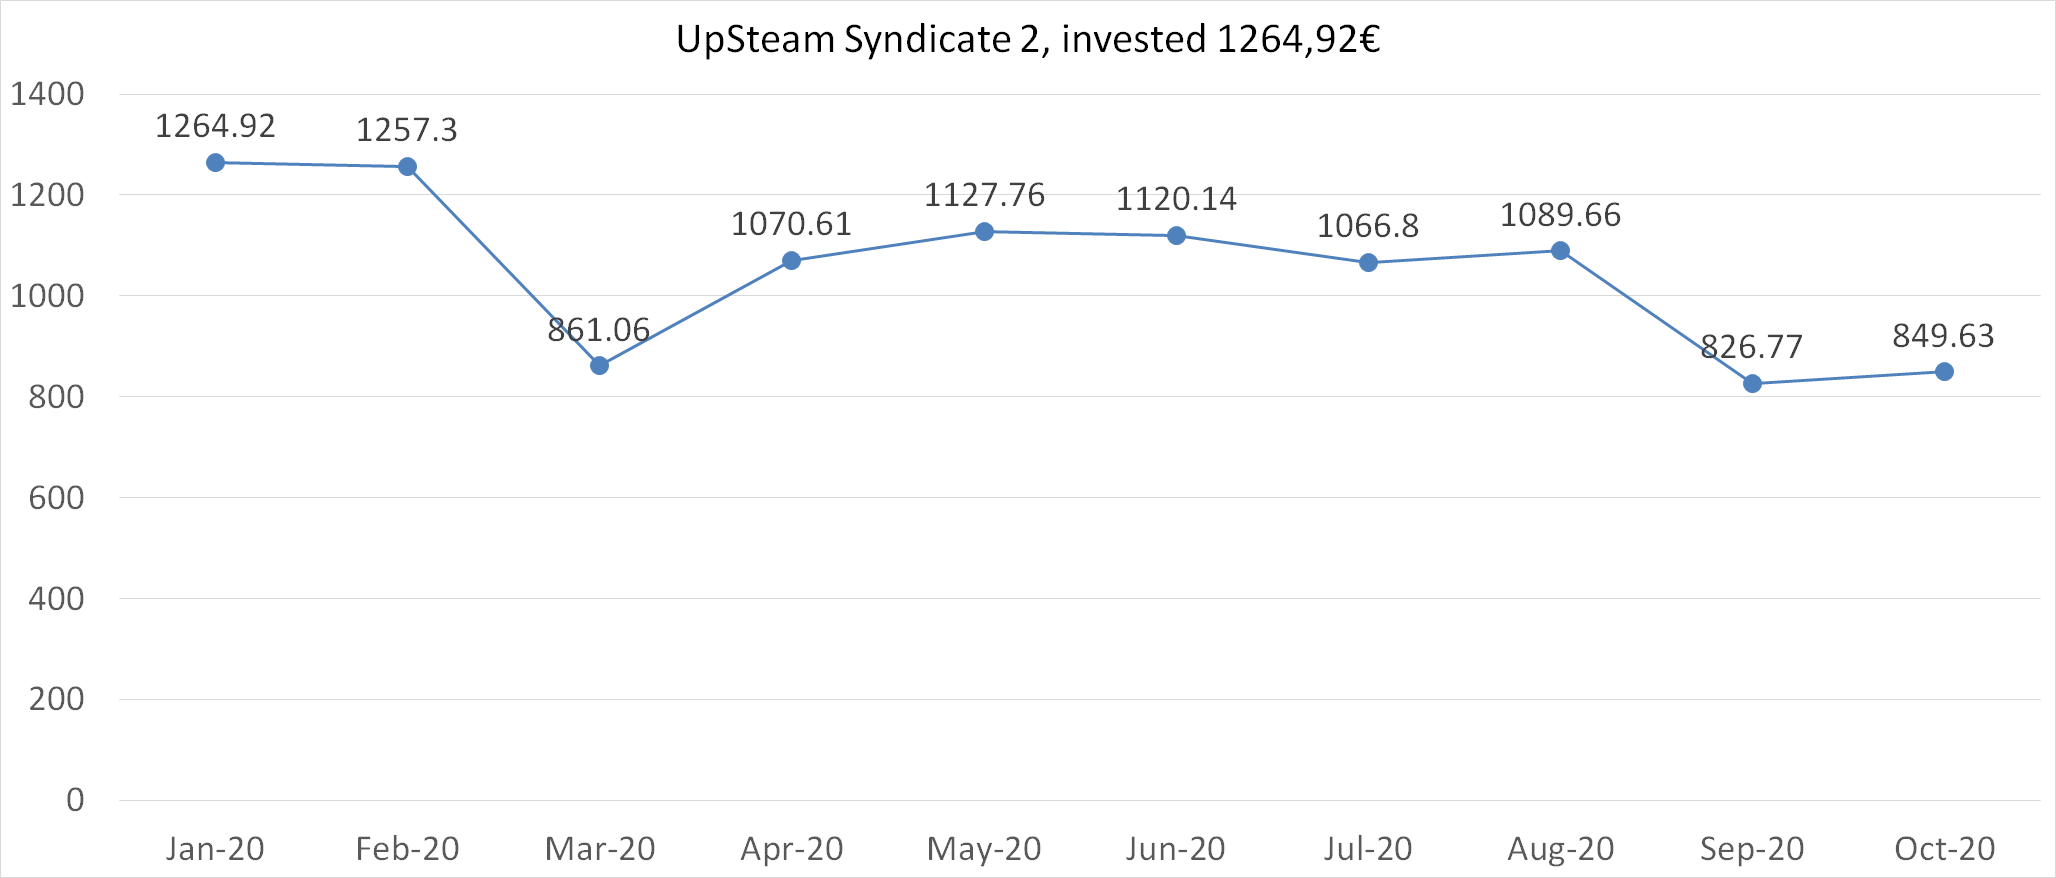 UpSteam syndicate 2 october 2020